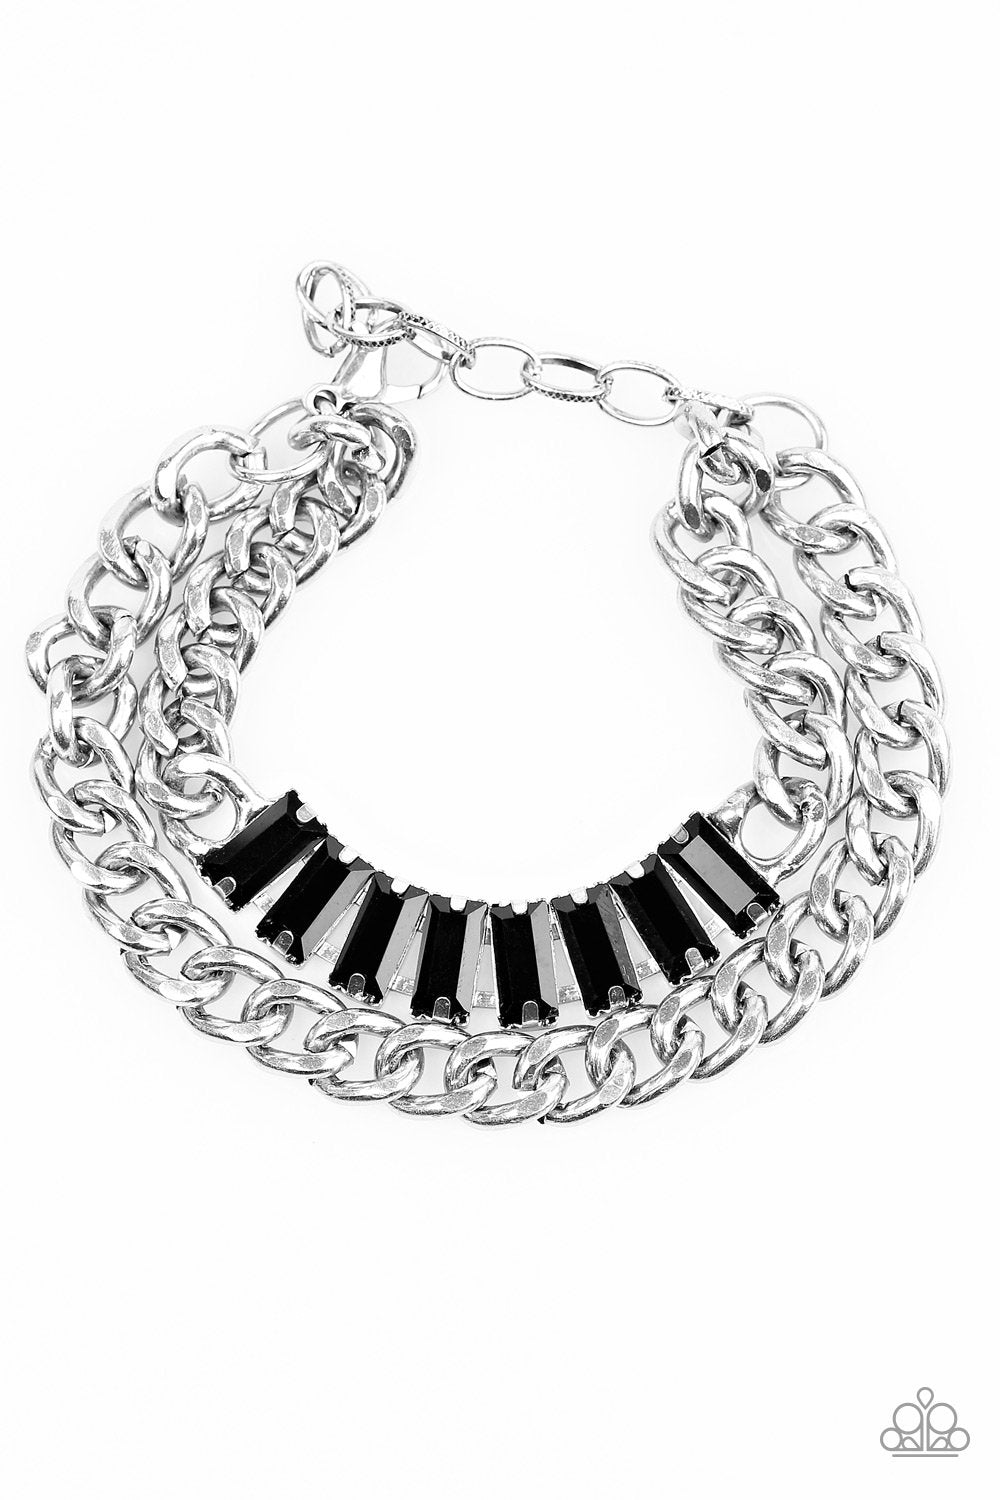 Plunge Into Grunge Silver Chain and Black Gem Bracelet - Paparazzi Accessories-CarasShop.com - $5 Jewelry by Cara Jewels